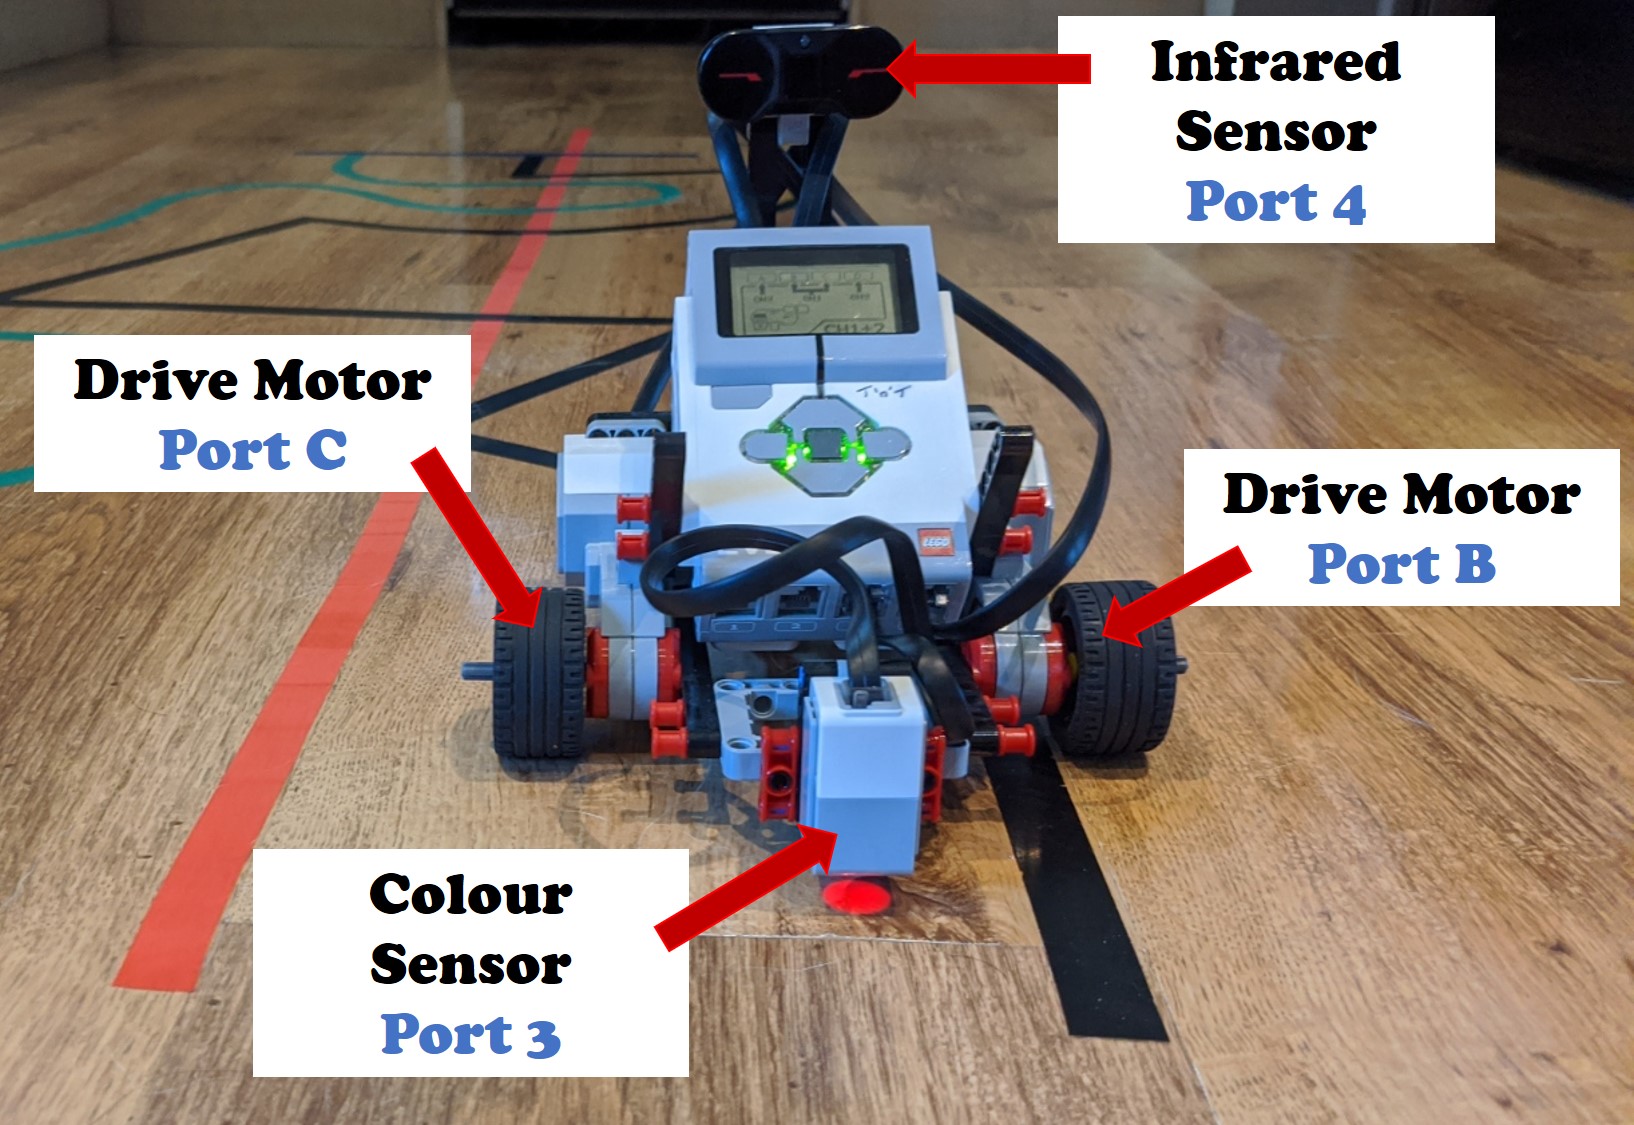 The specifications of the Johnny build. It's right wheel is powered by a motor in port C whilst the right is also motorised but through port B. A colour sensor mounted on the front pointing at the floor is connected to Port 3. An InfraRed sensor is facing forward mounted at the back and top, connected to Port 4